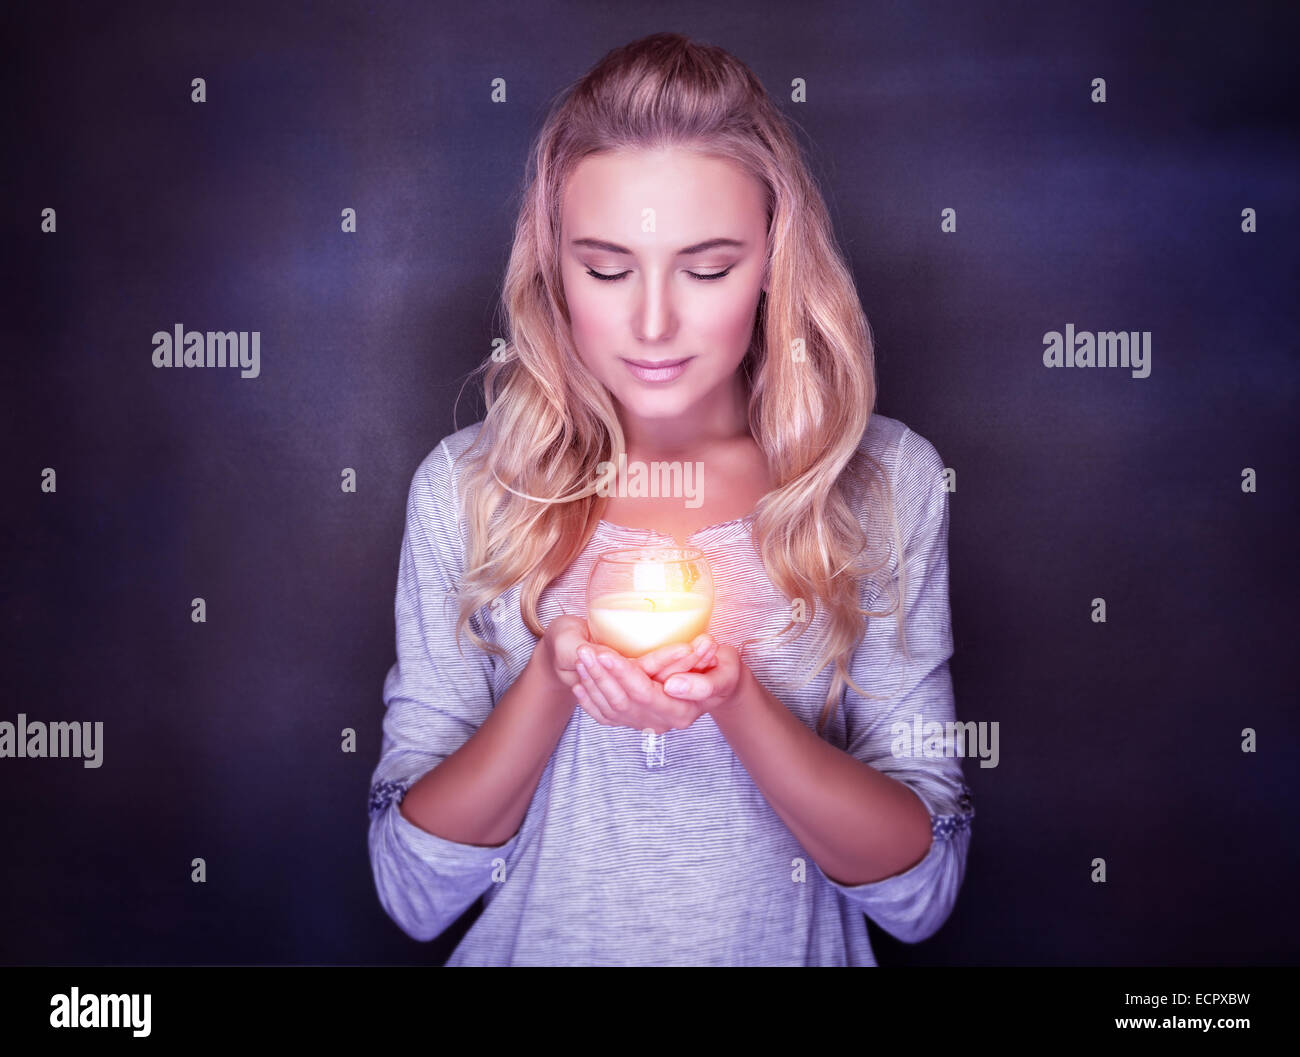 Attractive woman with candle on dark background, calm girl with closed eyes praying, Christmas holidays concept Stock Photo